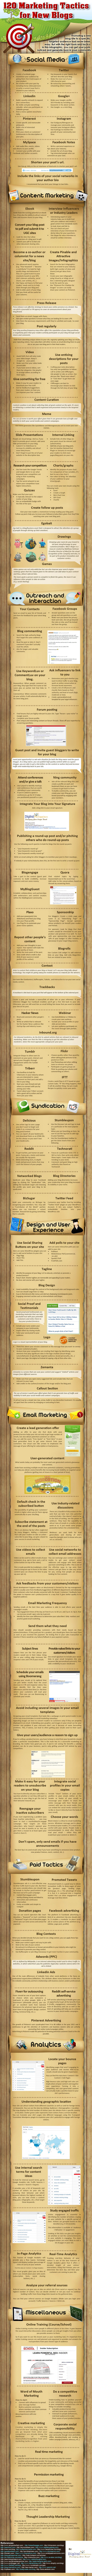 promote your new blog infographic